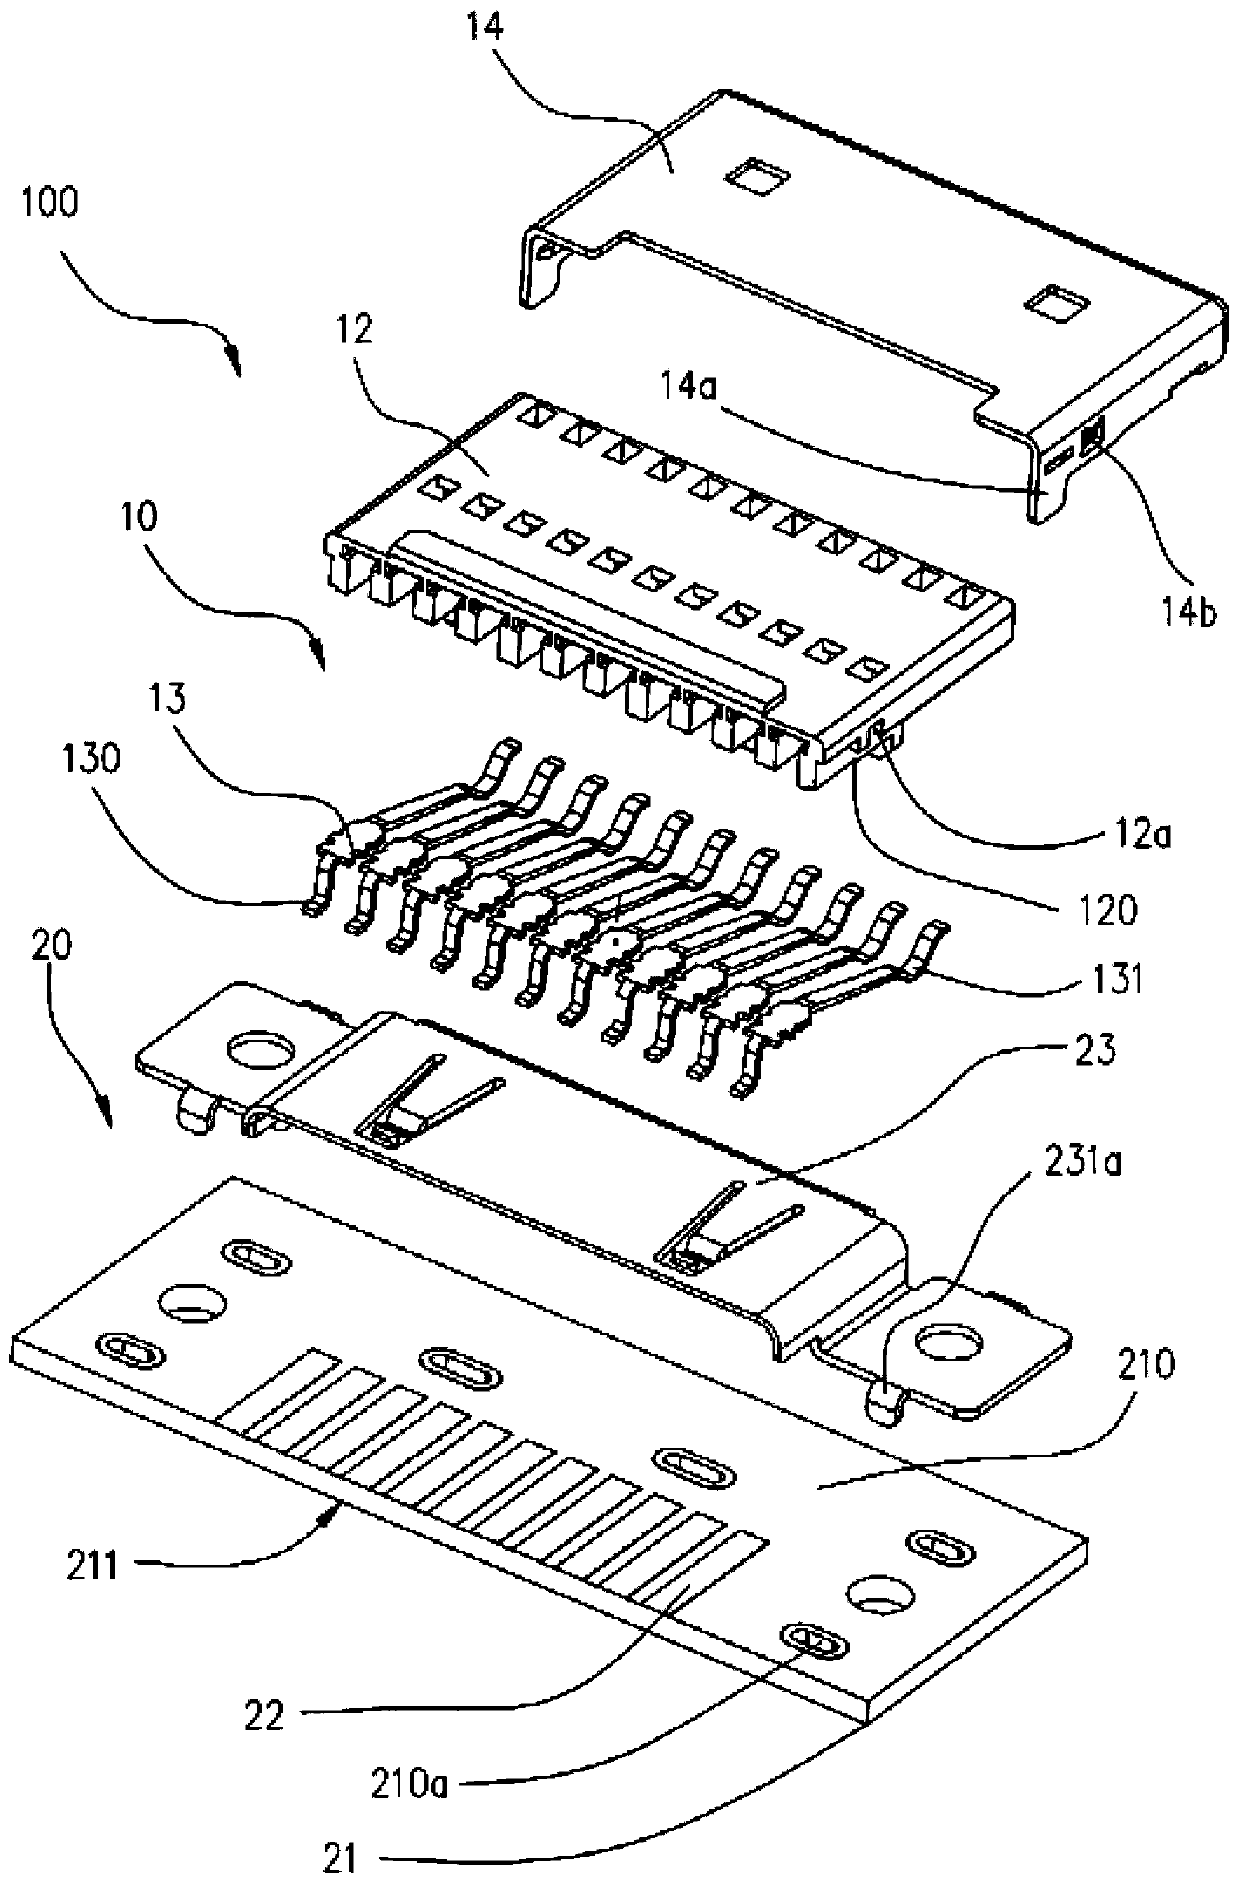 Connectors and Connector Components